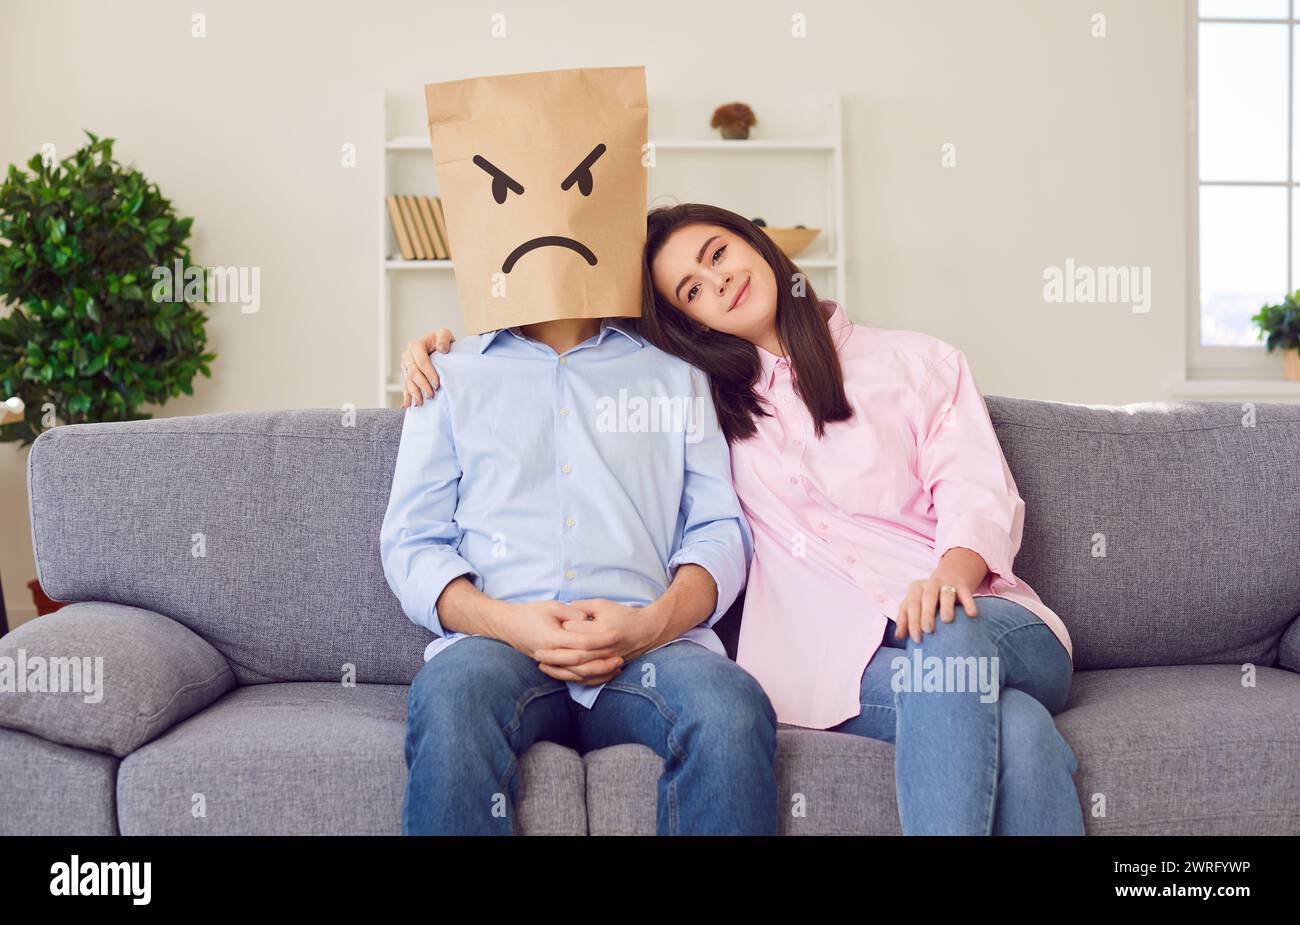 Loving, smiling wife trying to reconcile with husband who's still mad after fight Stock Photo